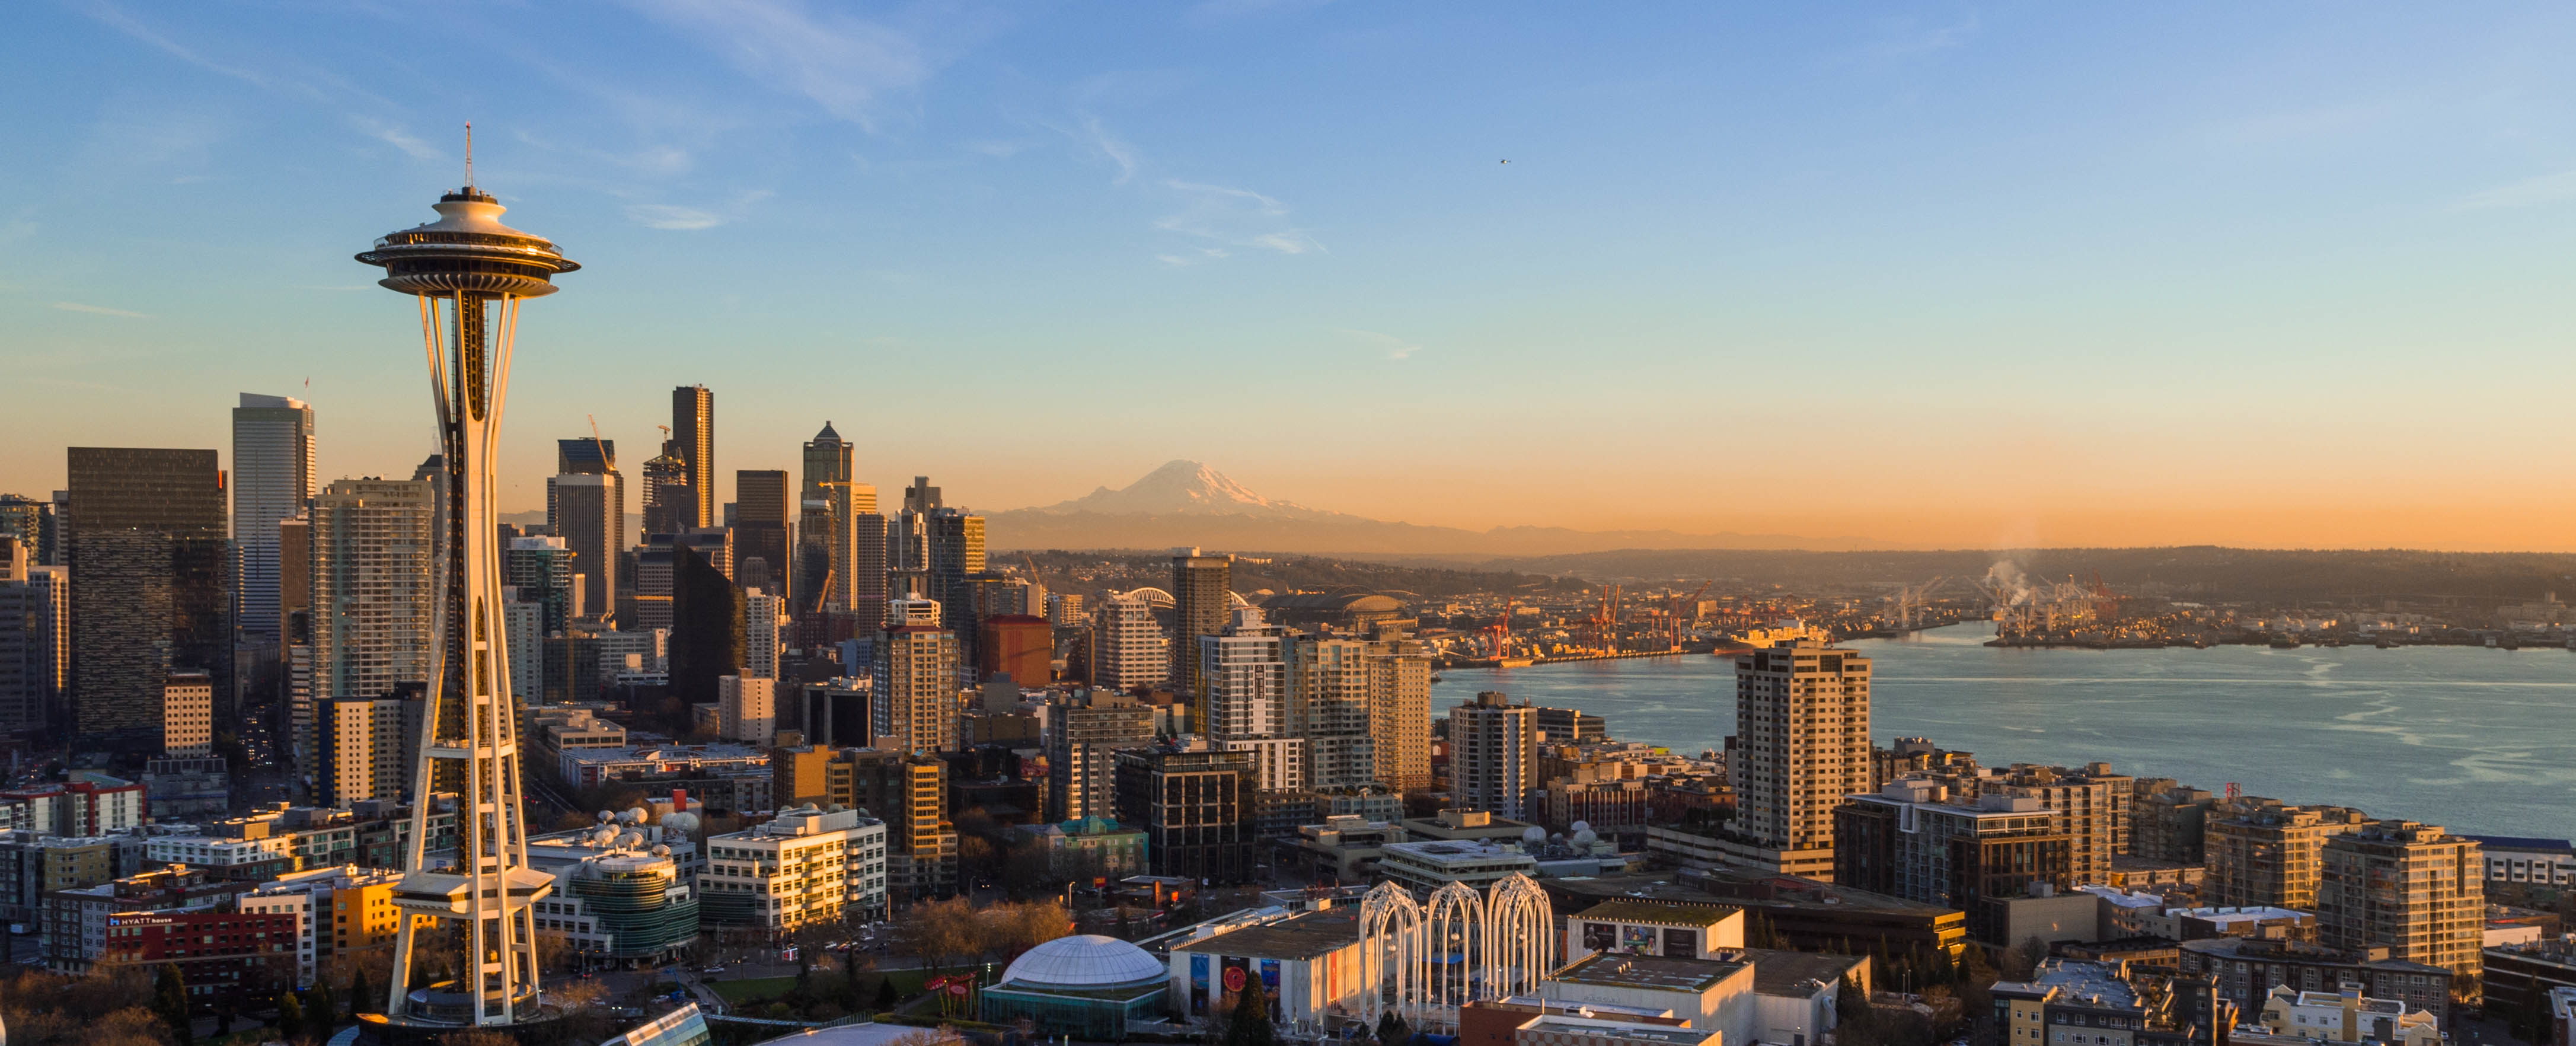 Seattle Skyline at Sunset with Space needle Acuitas Investments, LLC